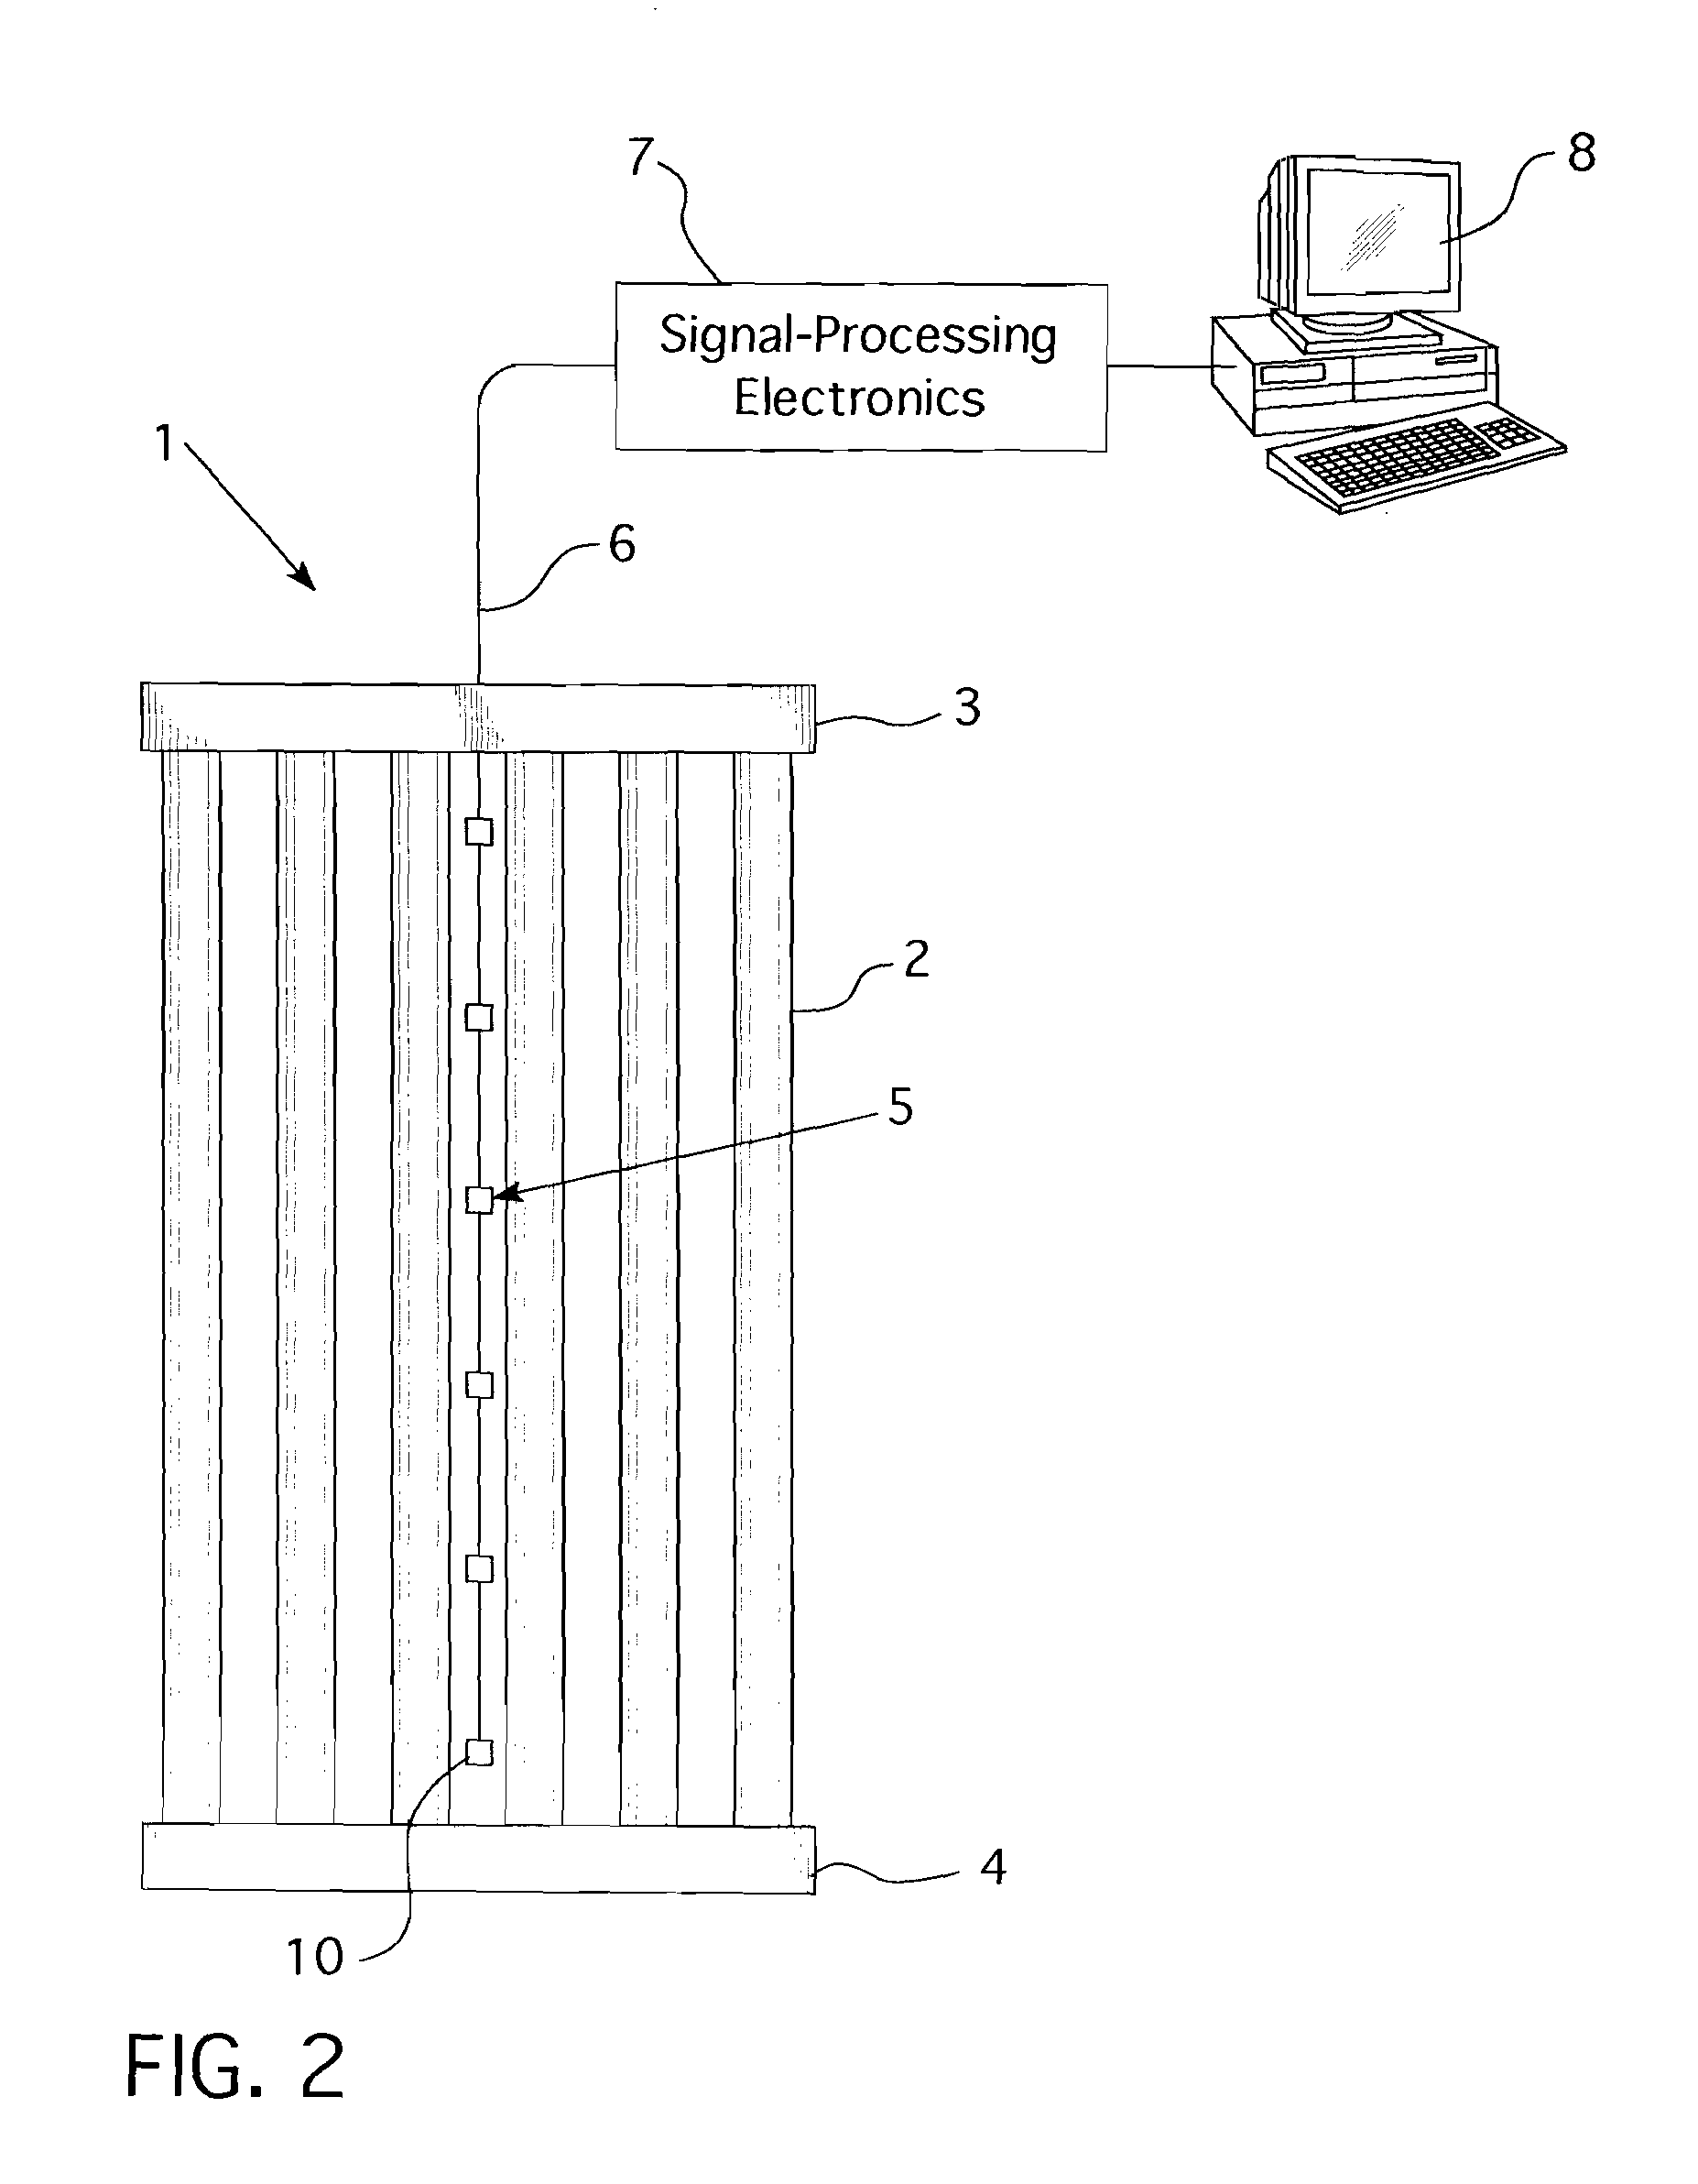 Method of improving the spent nuclear fuel burnup credit